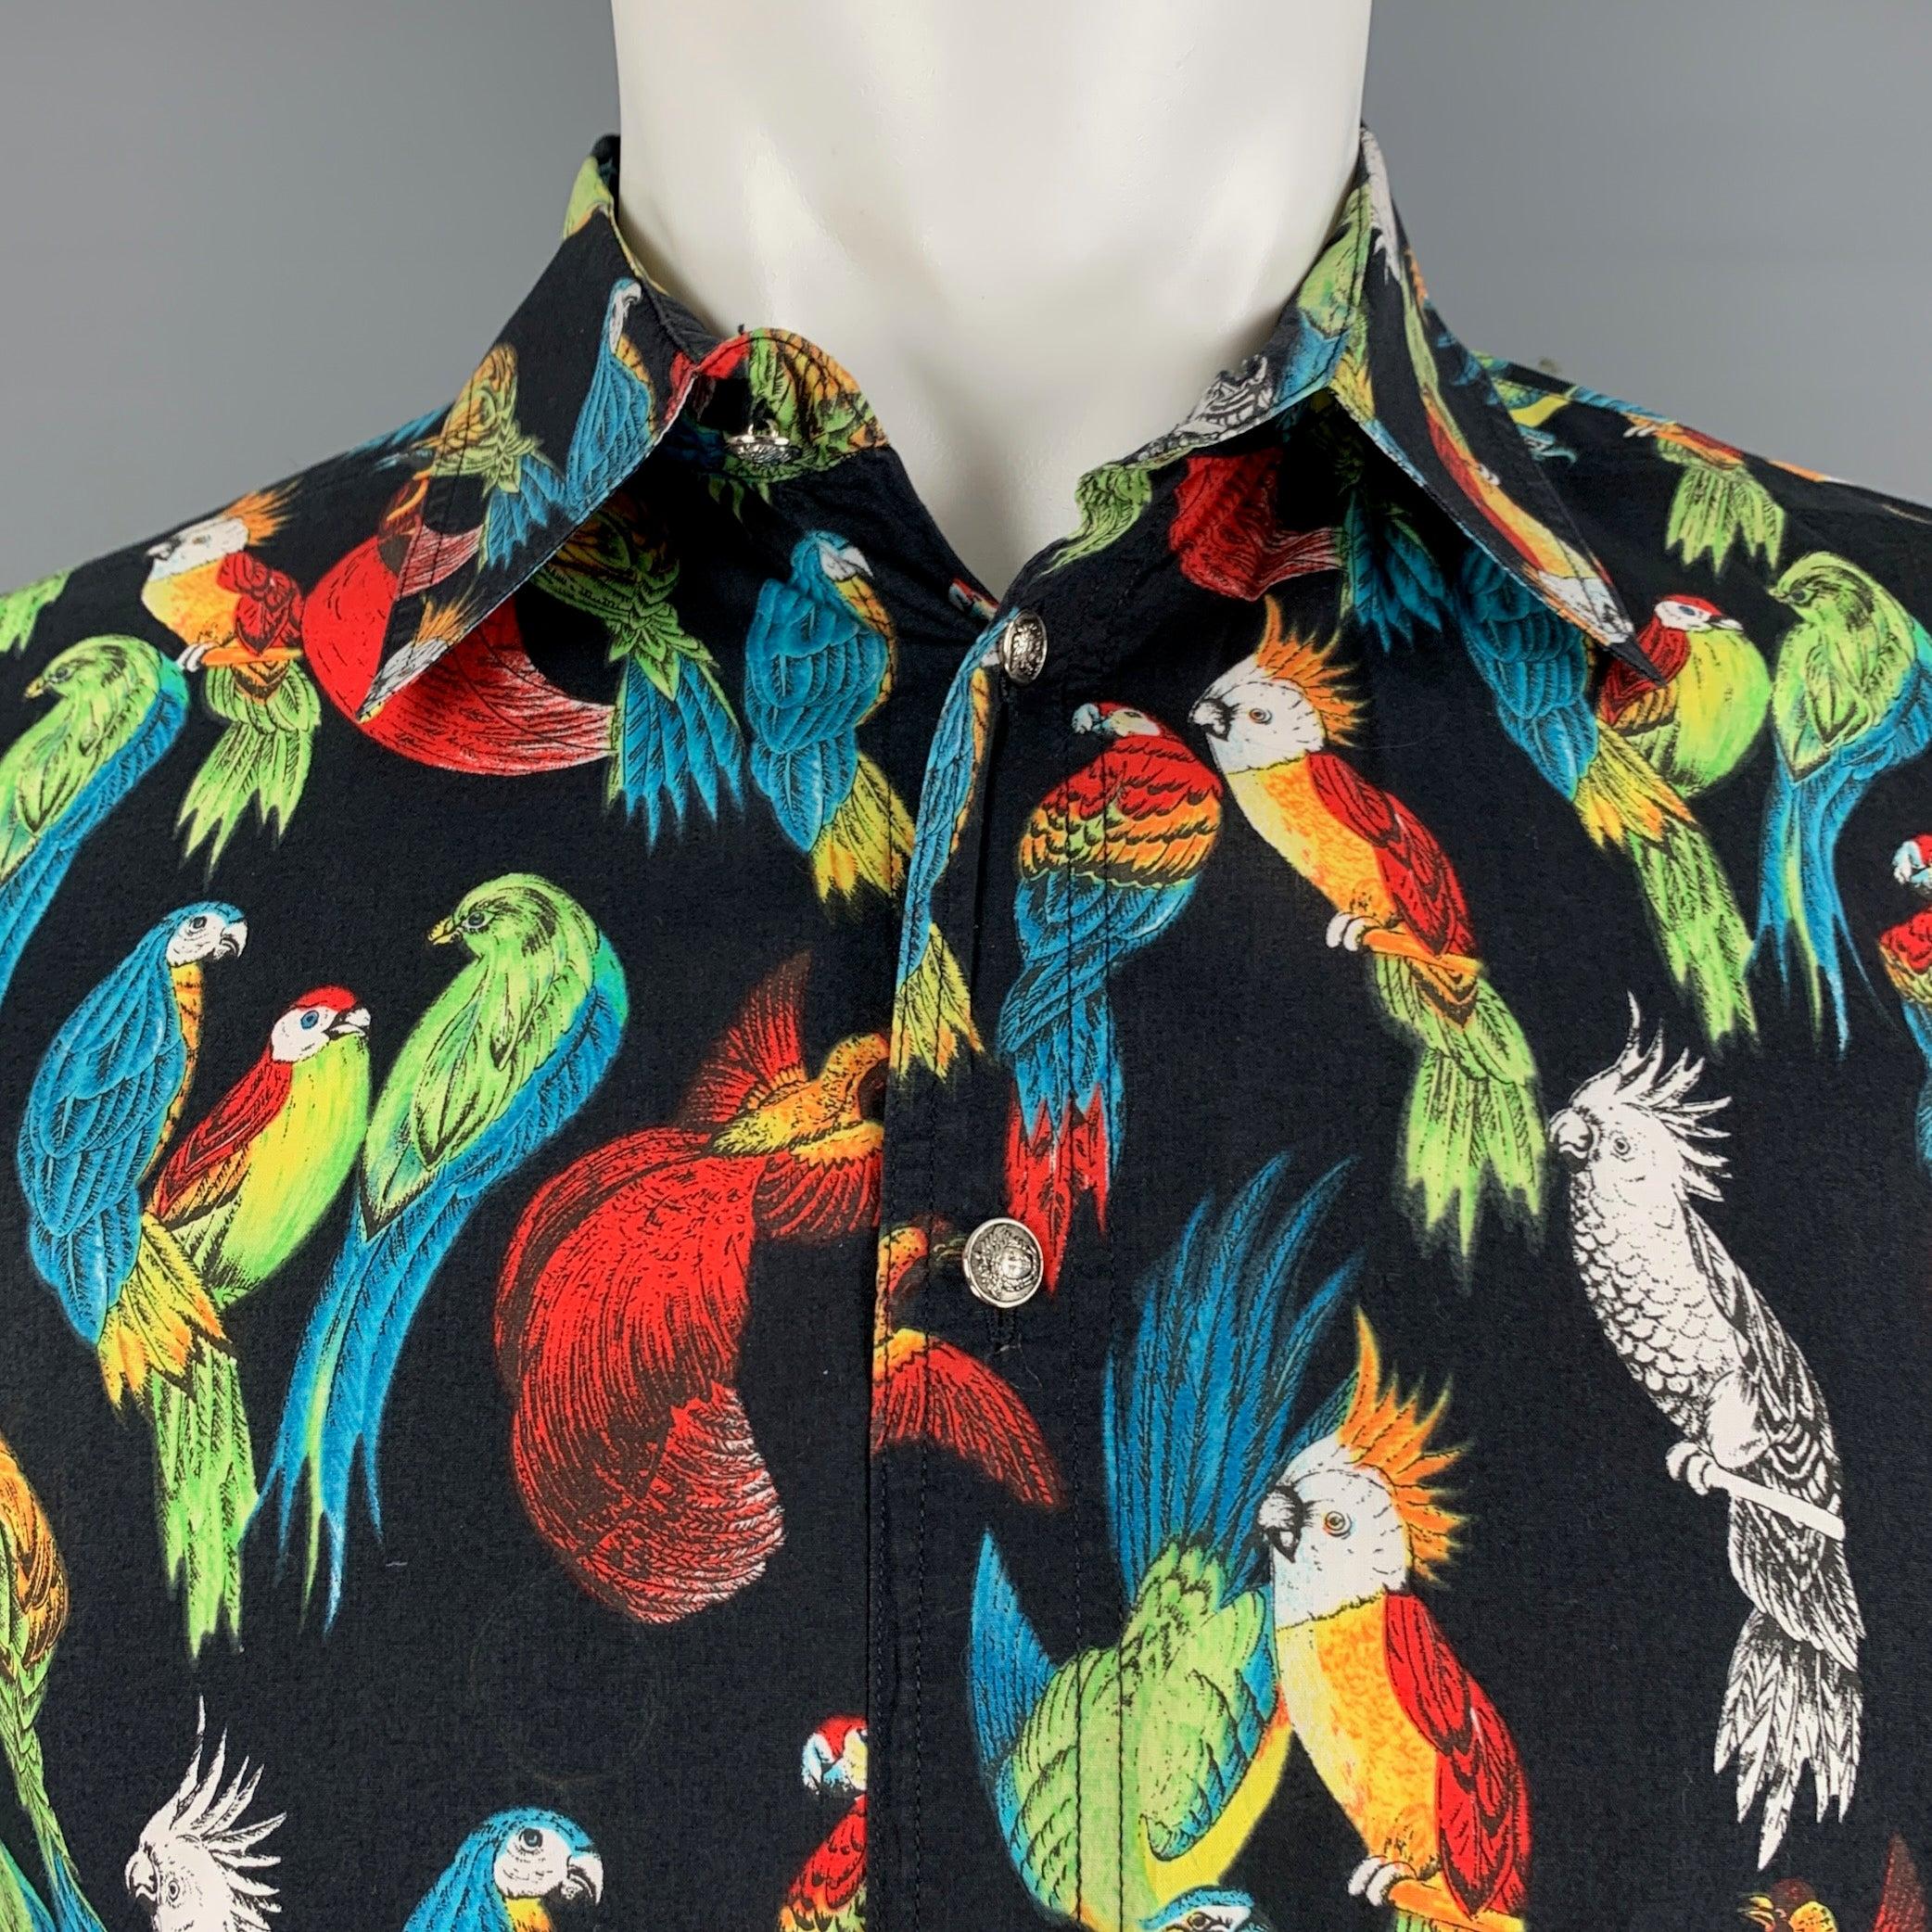 Vintage VERSACE JEANS COUTURE long sleeve shirt comes in a black and multi-color woven material featuring oversized style,
 silver tone medusa head buttons, tropical birds print motif, pointed collar, and a button up closure. Made in Italy. Very